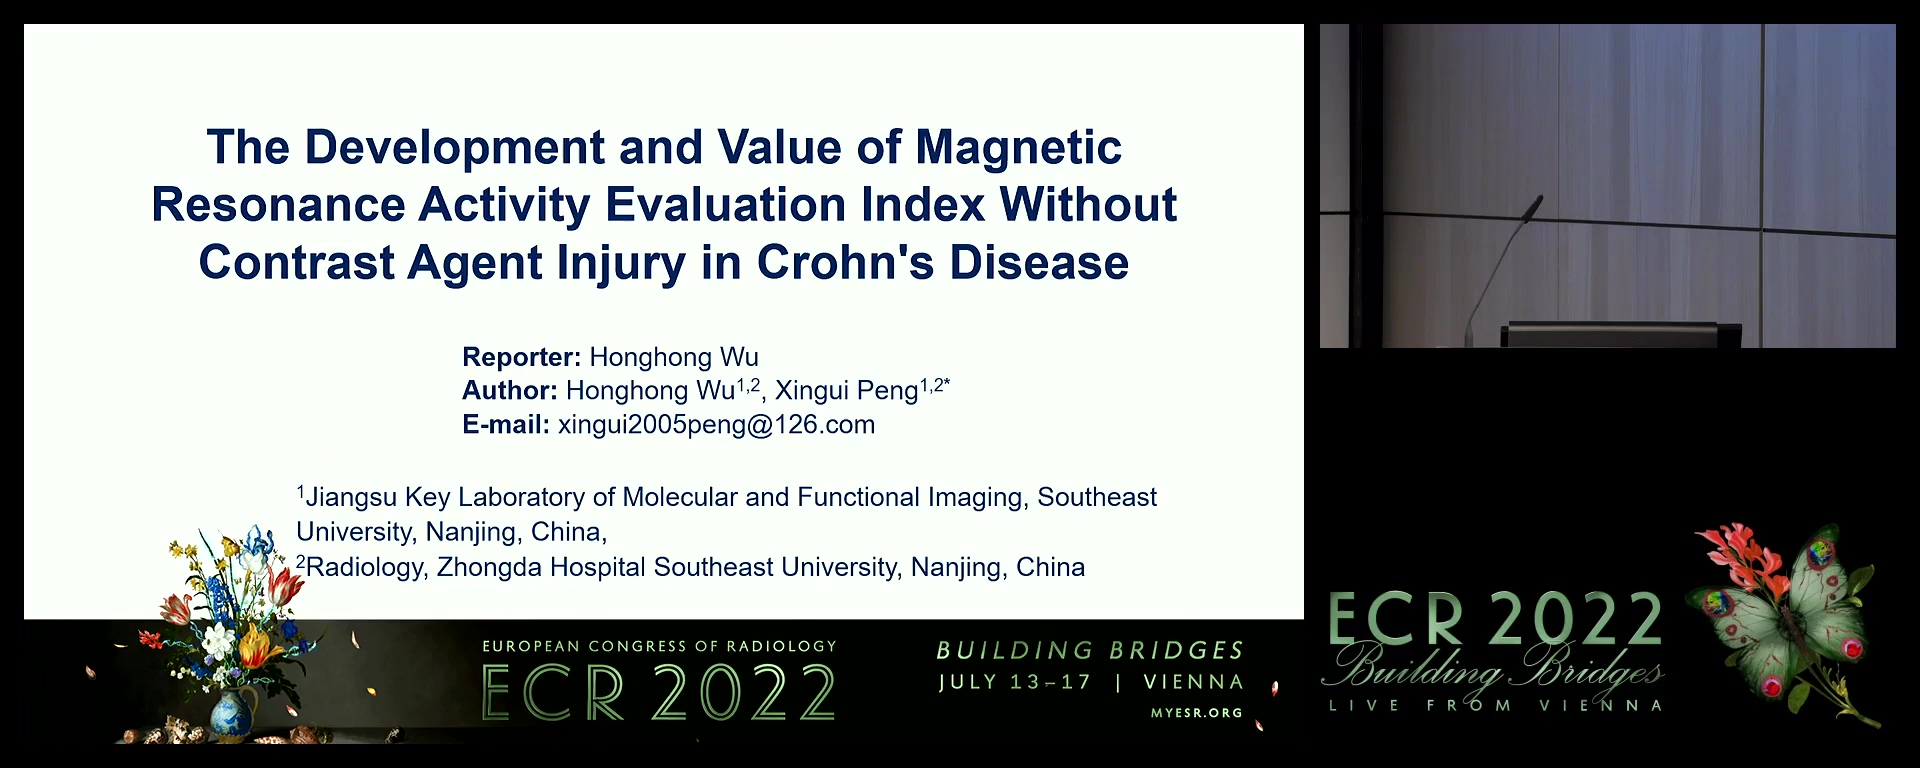 The development and value of magnetic resonance activity evaluation index without contrast agent injury in Crohn's disease - Honghong Wu, Nan jing / CN